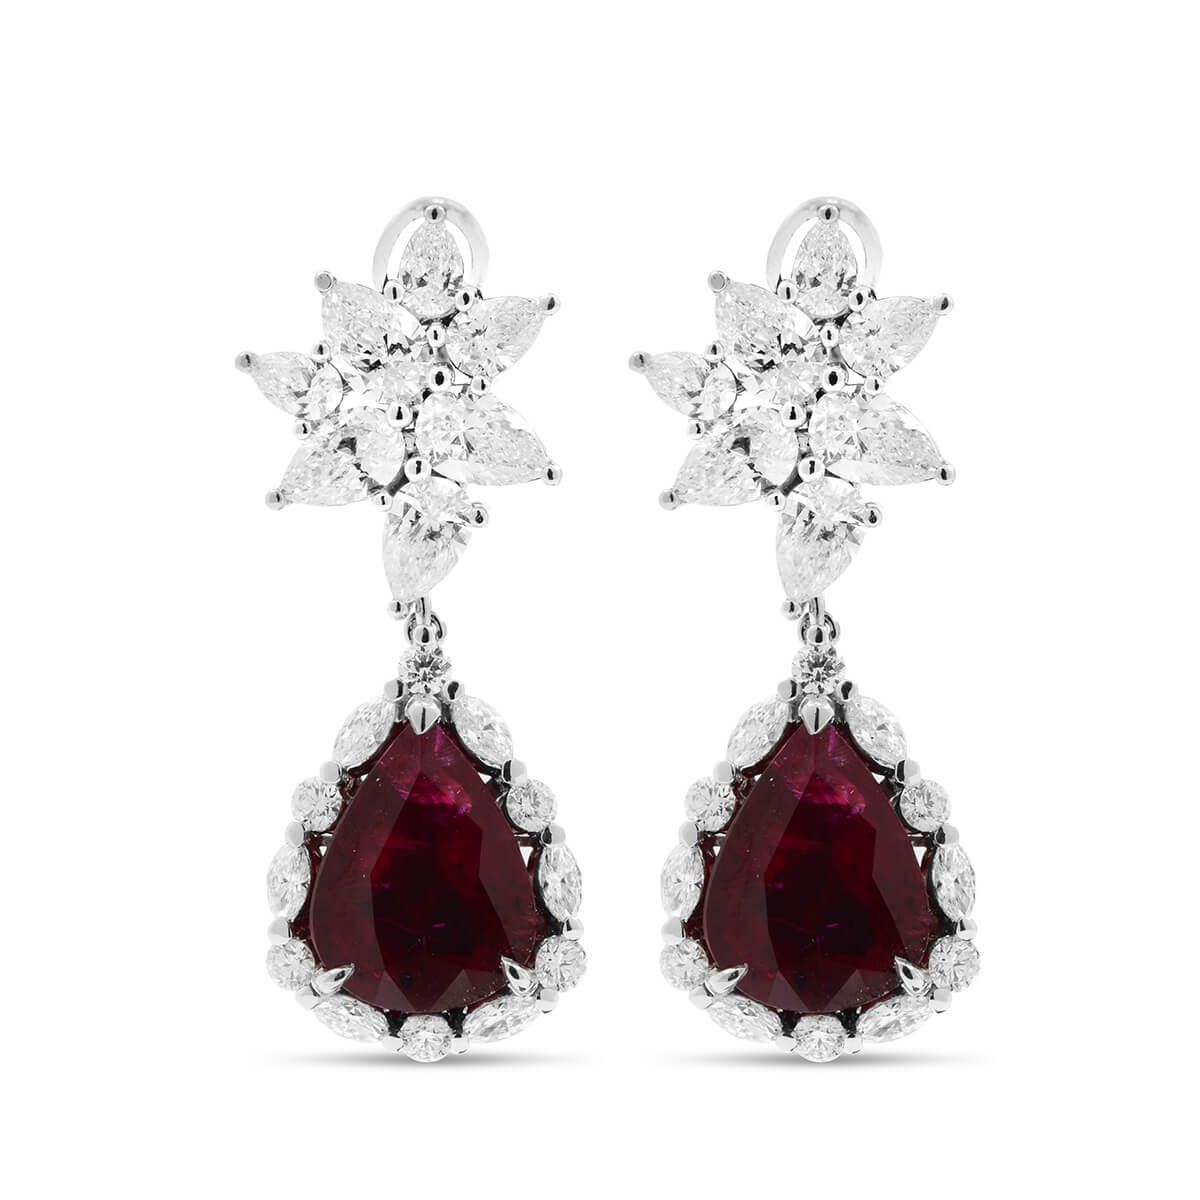 Natural Vivid Red Mozambique Ruby Earrings, 12.14 Ct. (17.55 Ct. TW), GRS Certified, JCEG01061722, Unheated